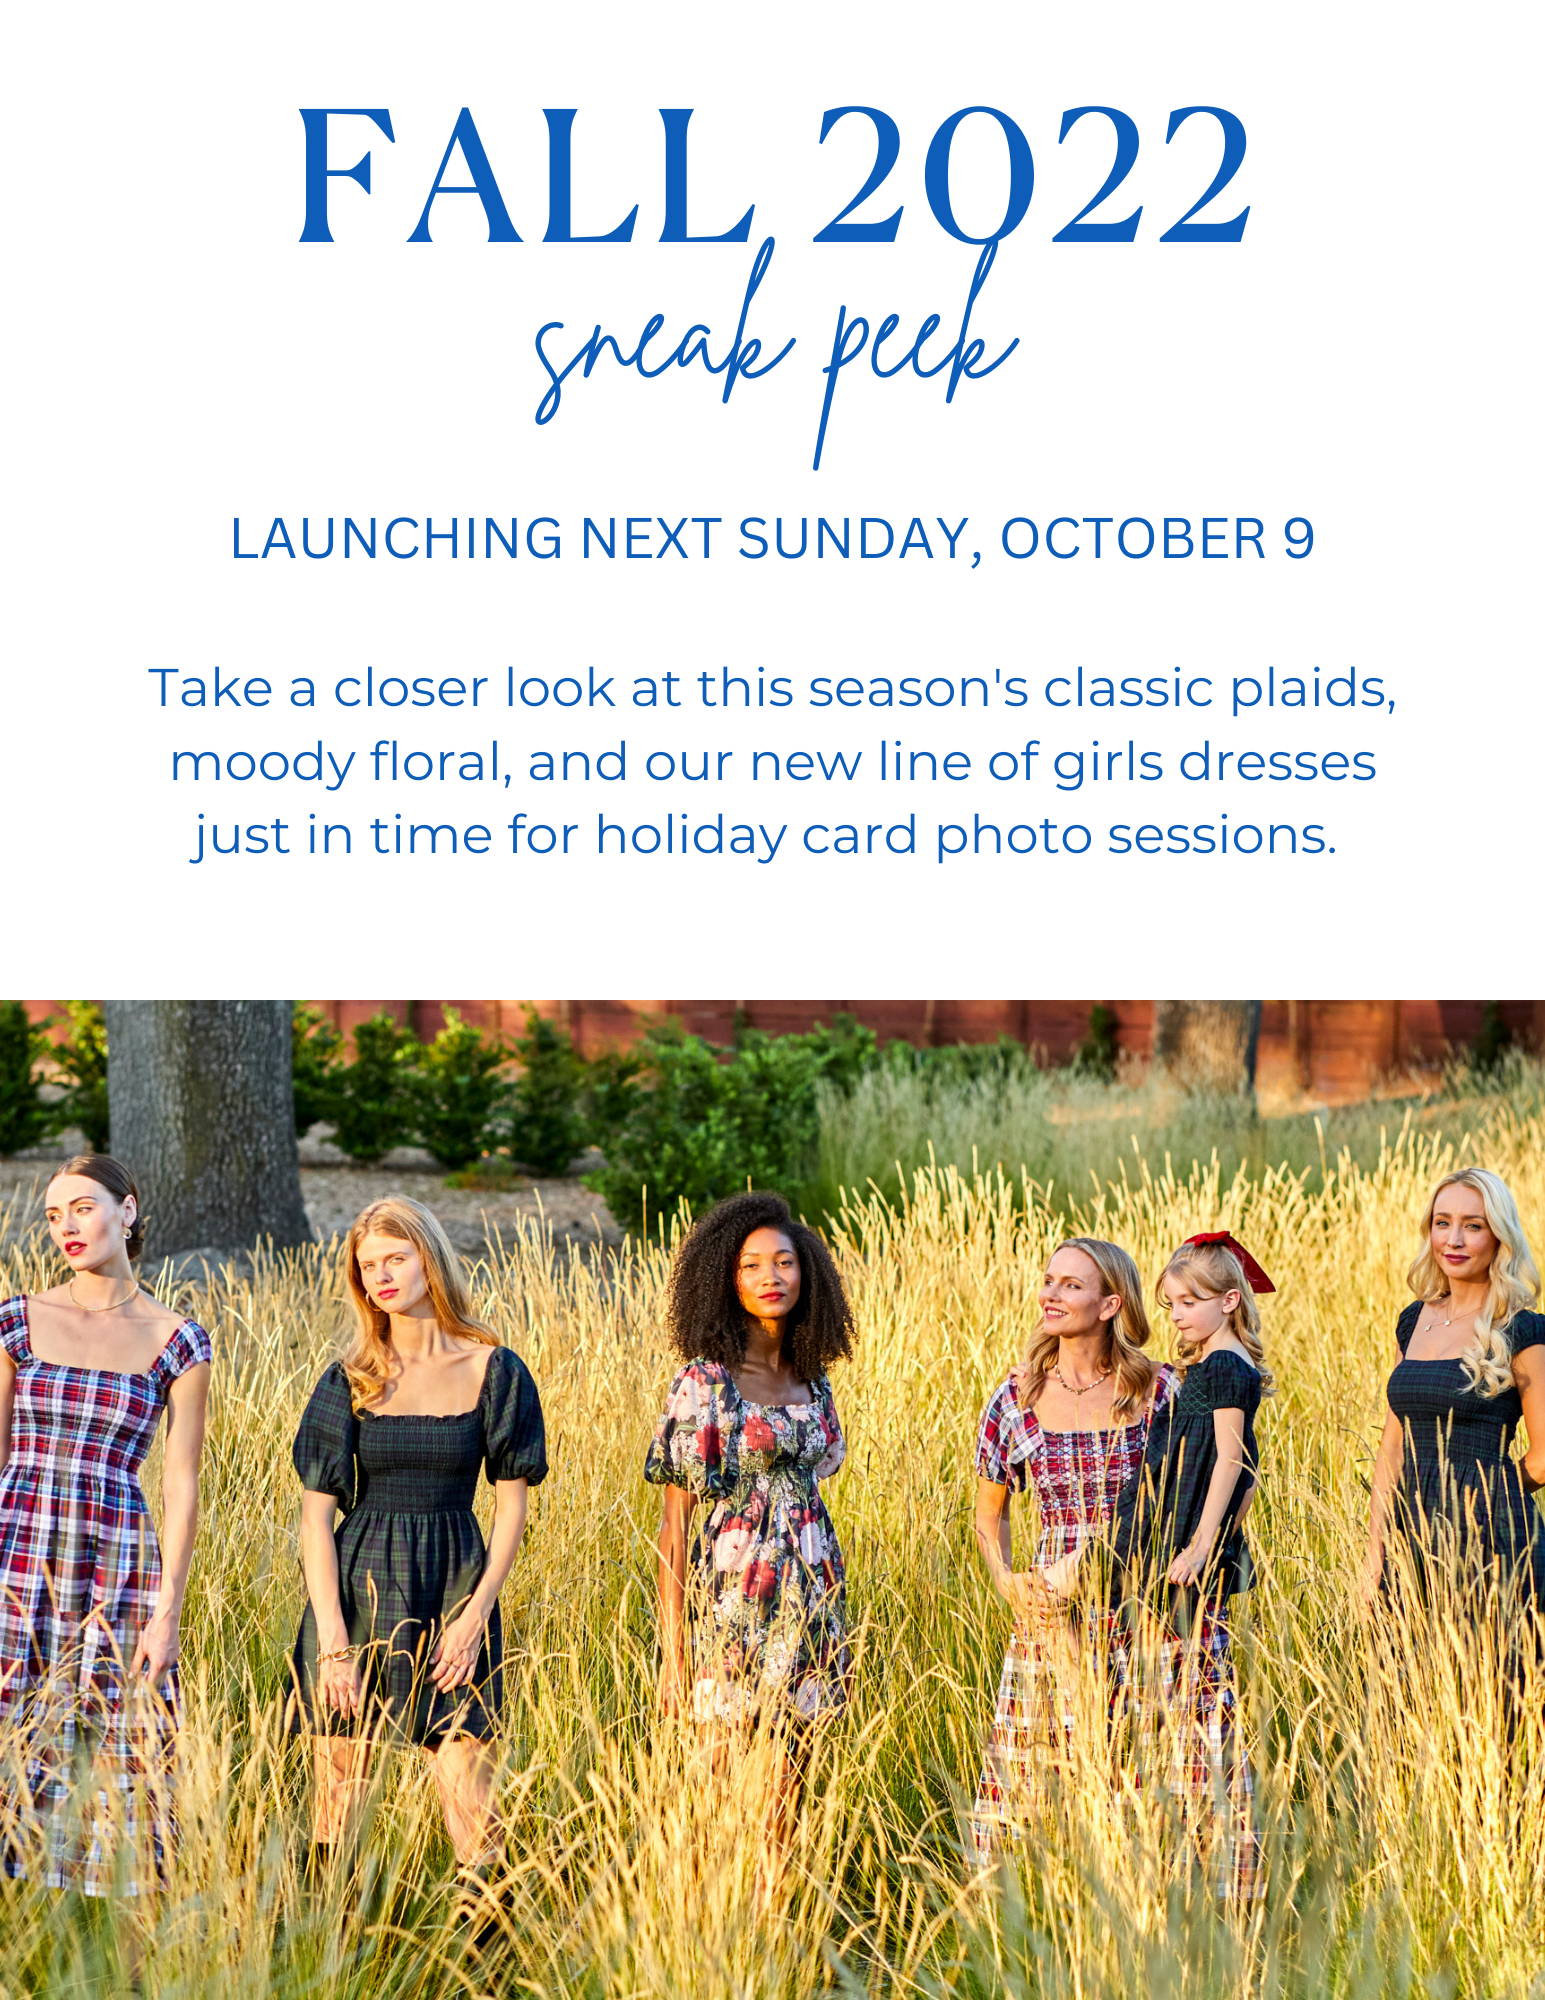 Launching Next Sunday, October 9th! Take a closer look at this season's classic plaids, moody floral, and our new line of girls dresses just in time for holiday card photo sessions.